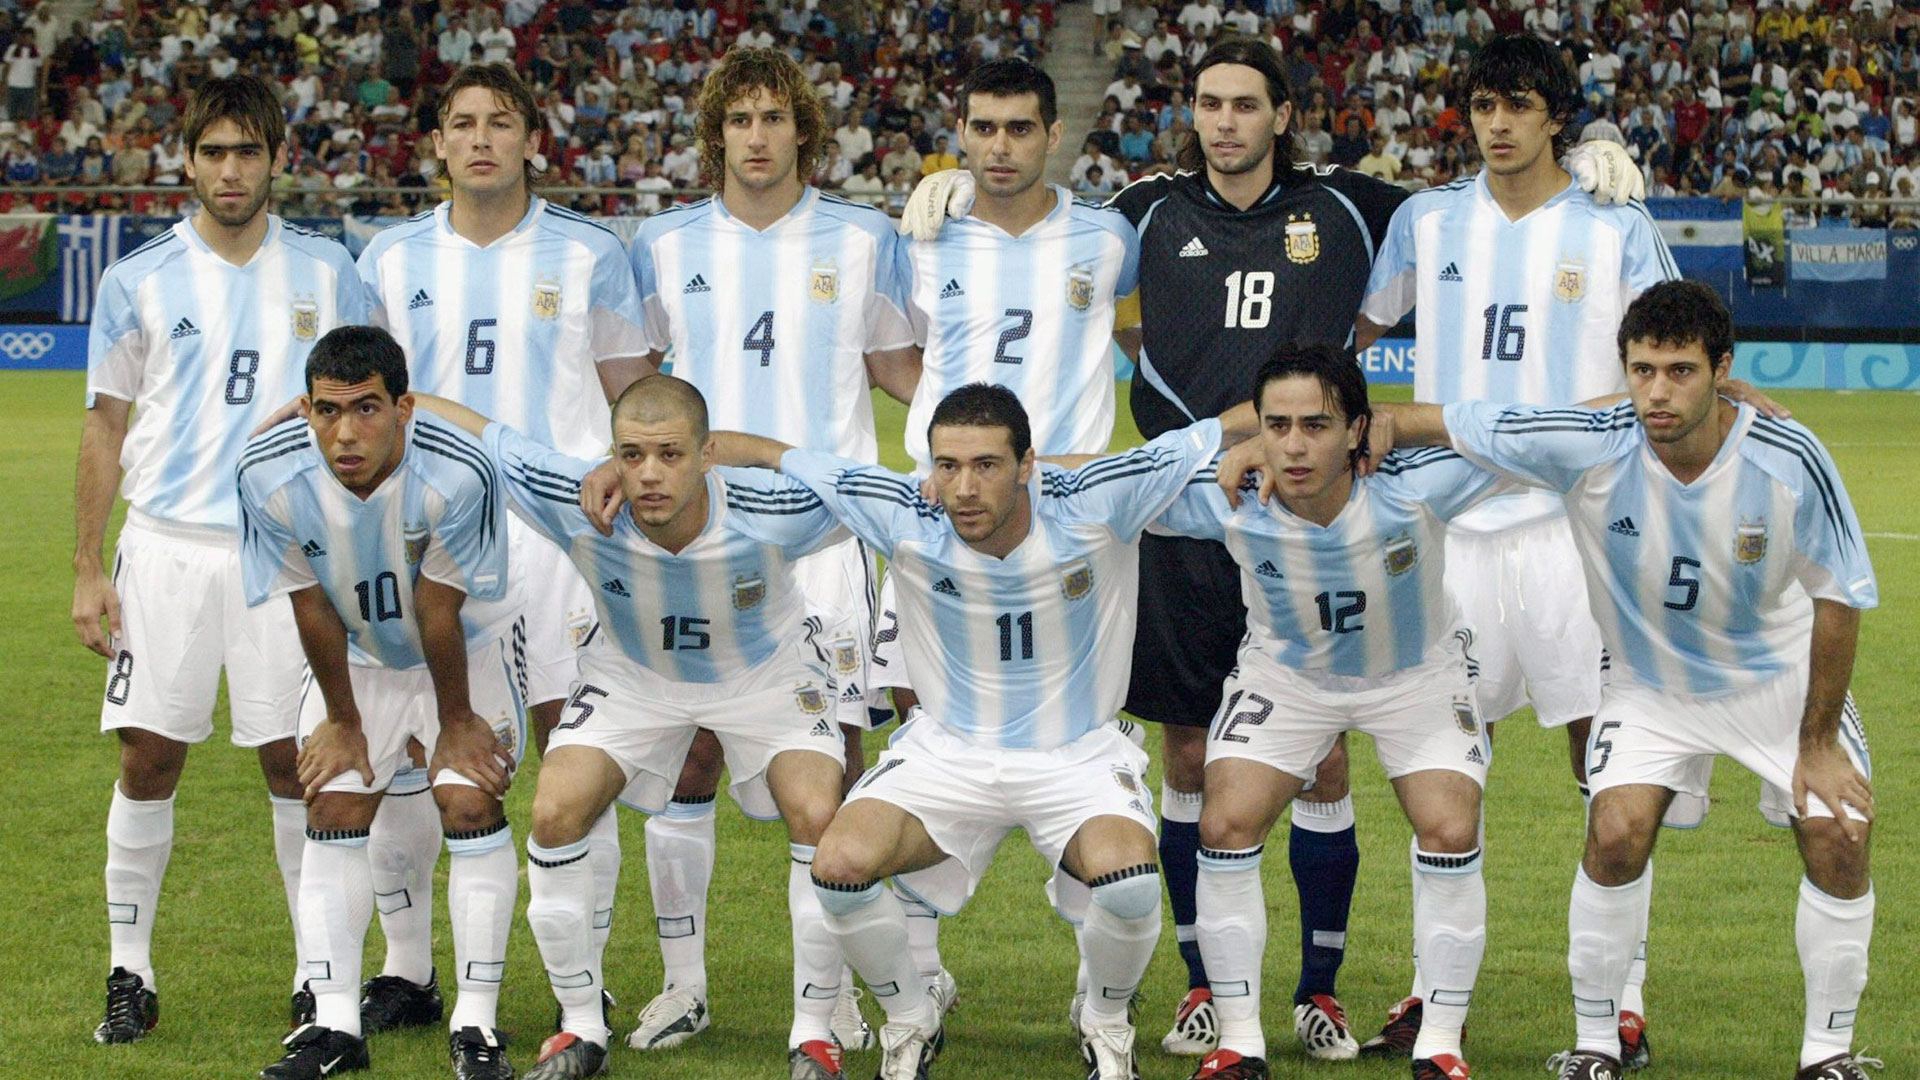 The Argentina national team jersey with the two stars on the chest worn for the first time by Argentina at the Athens 2004 Olympic Games (Photo: Getty Images)